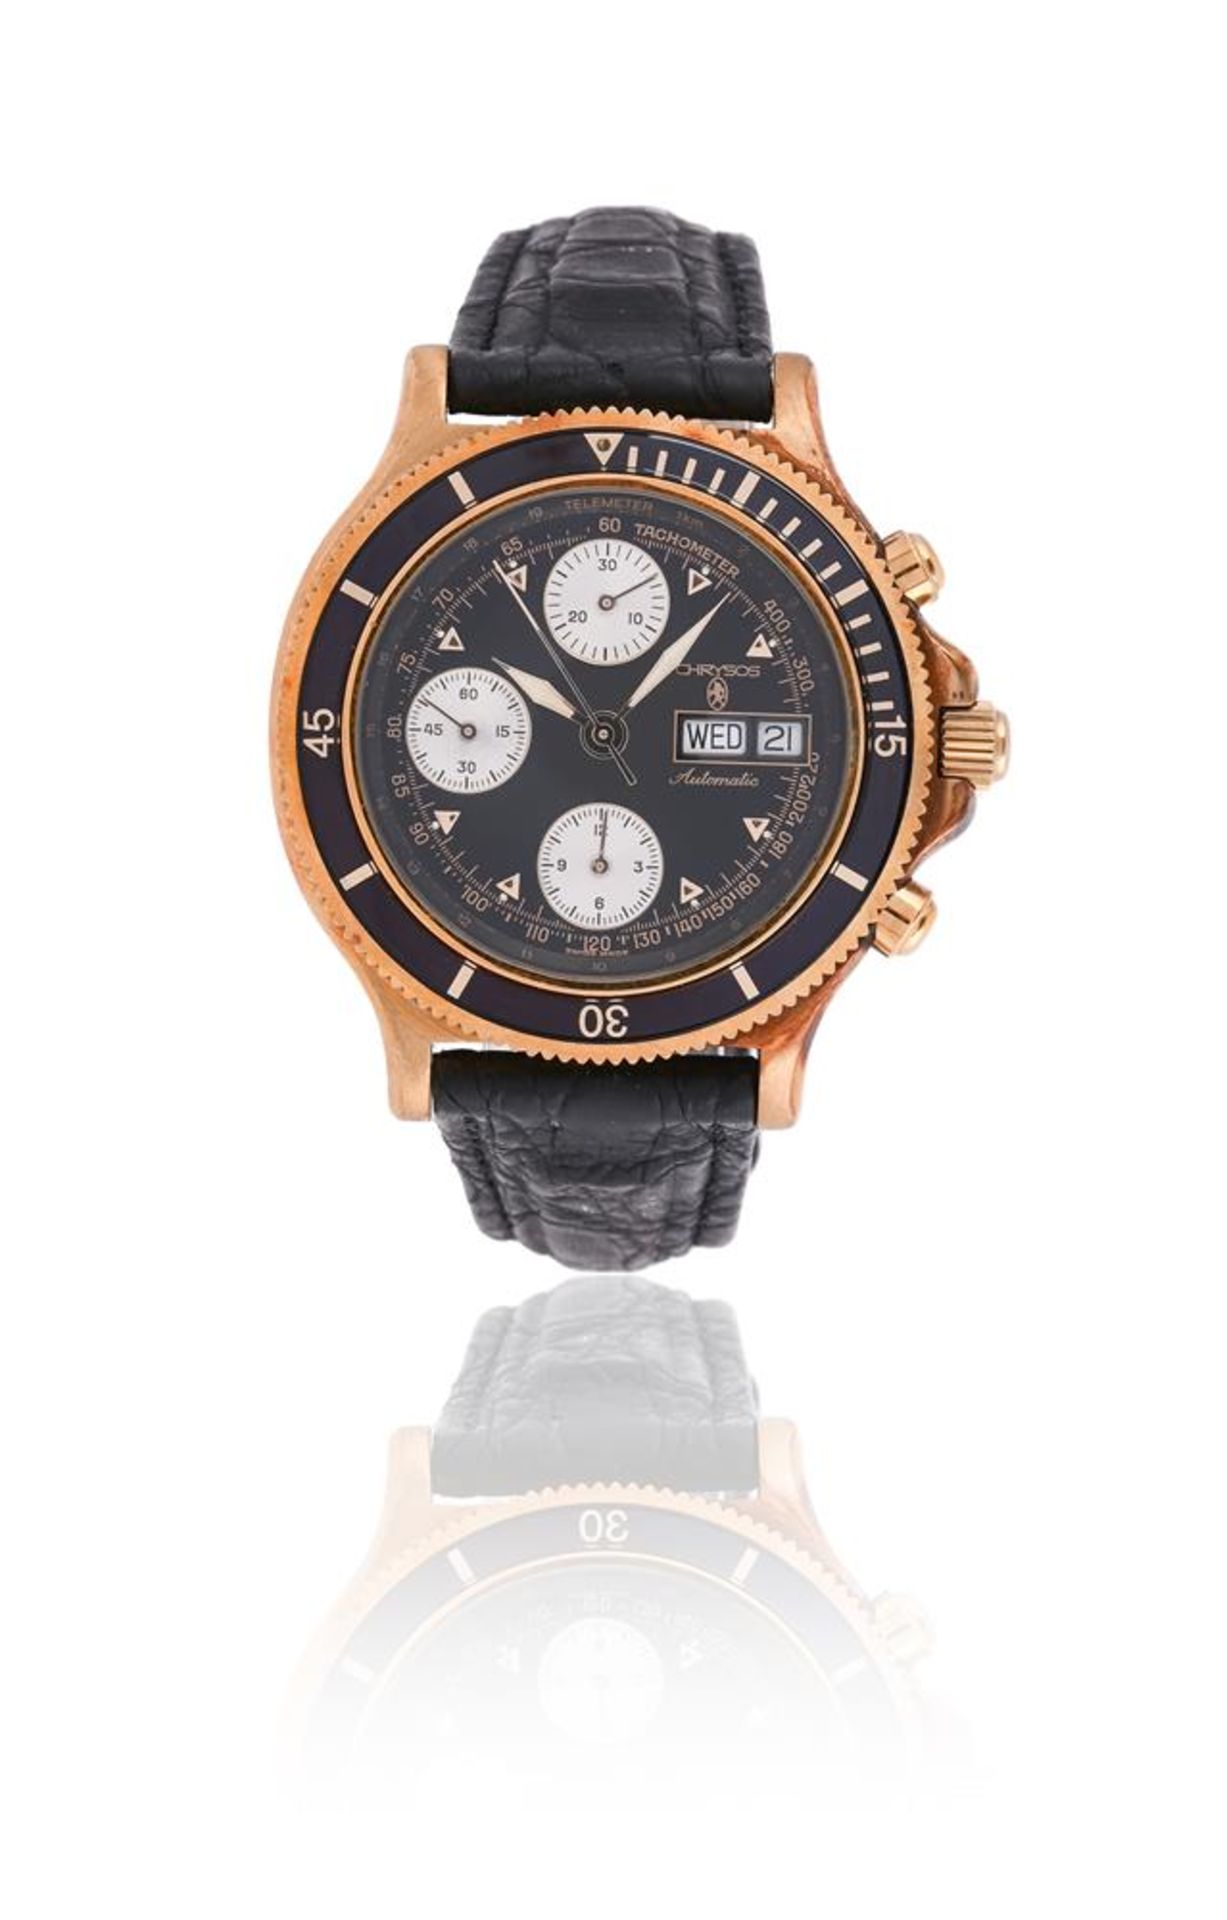 Y CHRYSOS, A GOLD COLOURED CHRONOGRAPH WRIST WATCH WITH DAY AND DATE